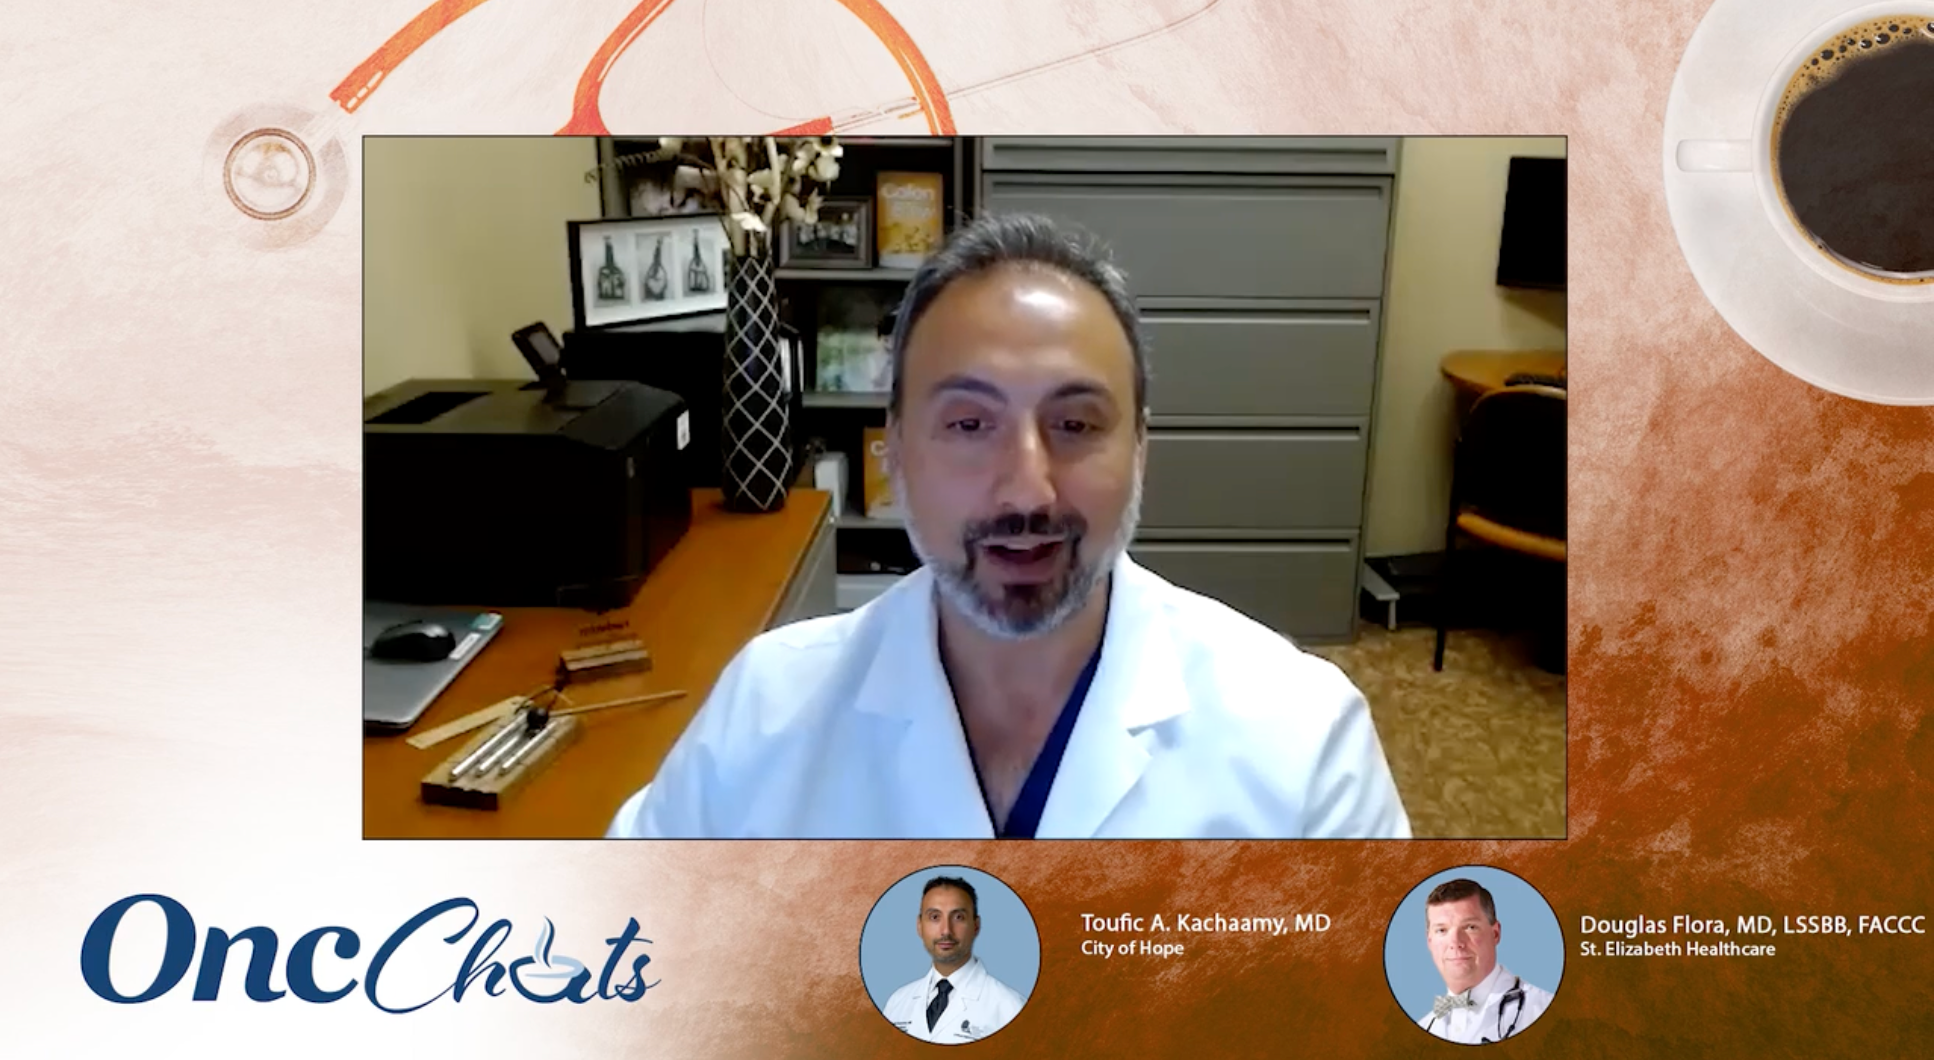 In this fourth episode of OncChats: Assessing the Promise of AI in Oncology, Toufic A. Kachaamy, MD, and Douglas Flora, MD, LSSBB, FACCC, explain the importance of having a diverse editorial board behind a new journal on artificial intelligence in precision oncology.